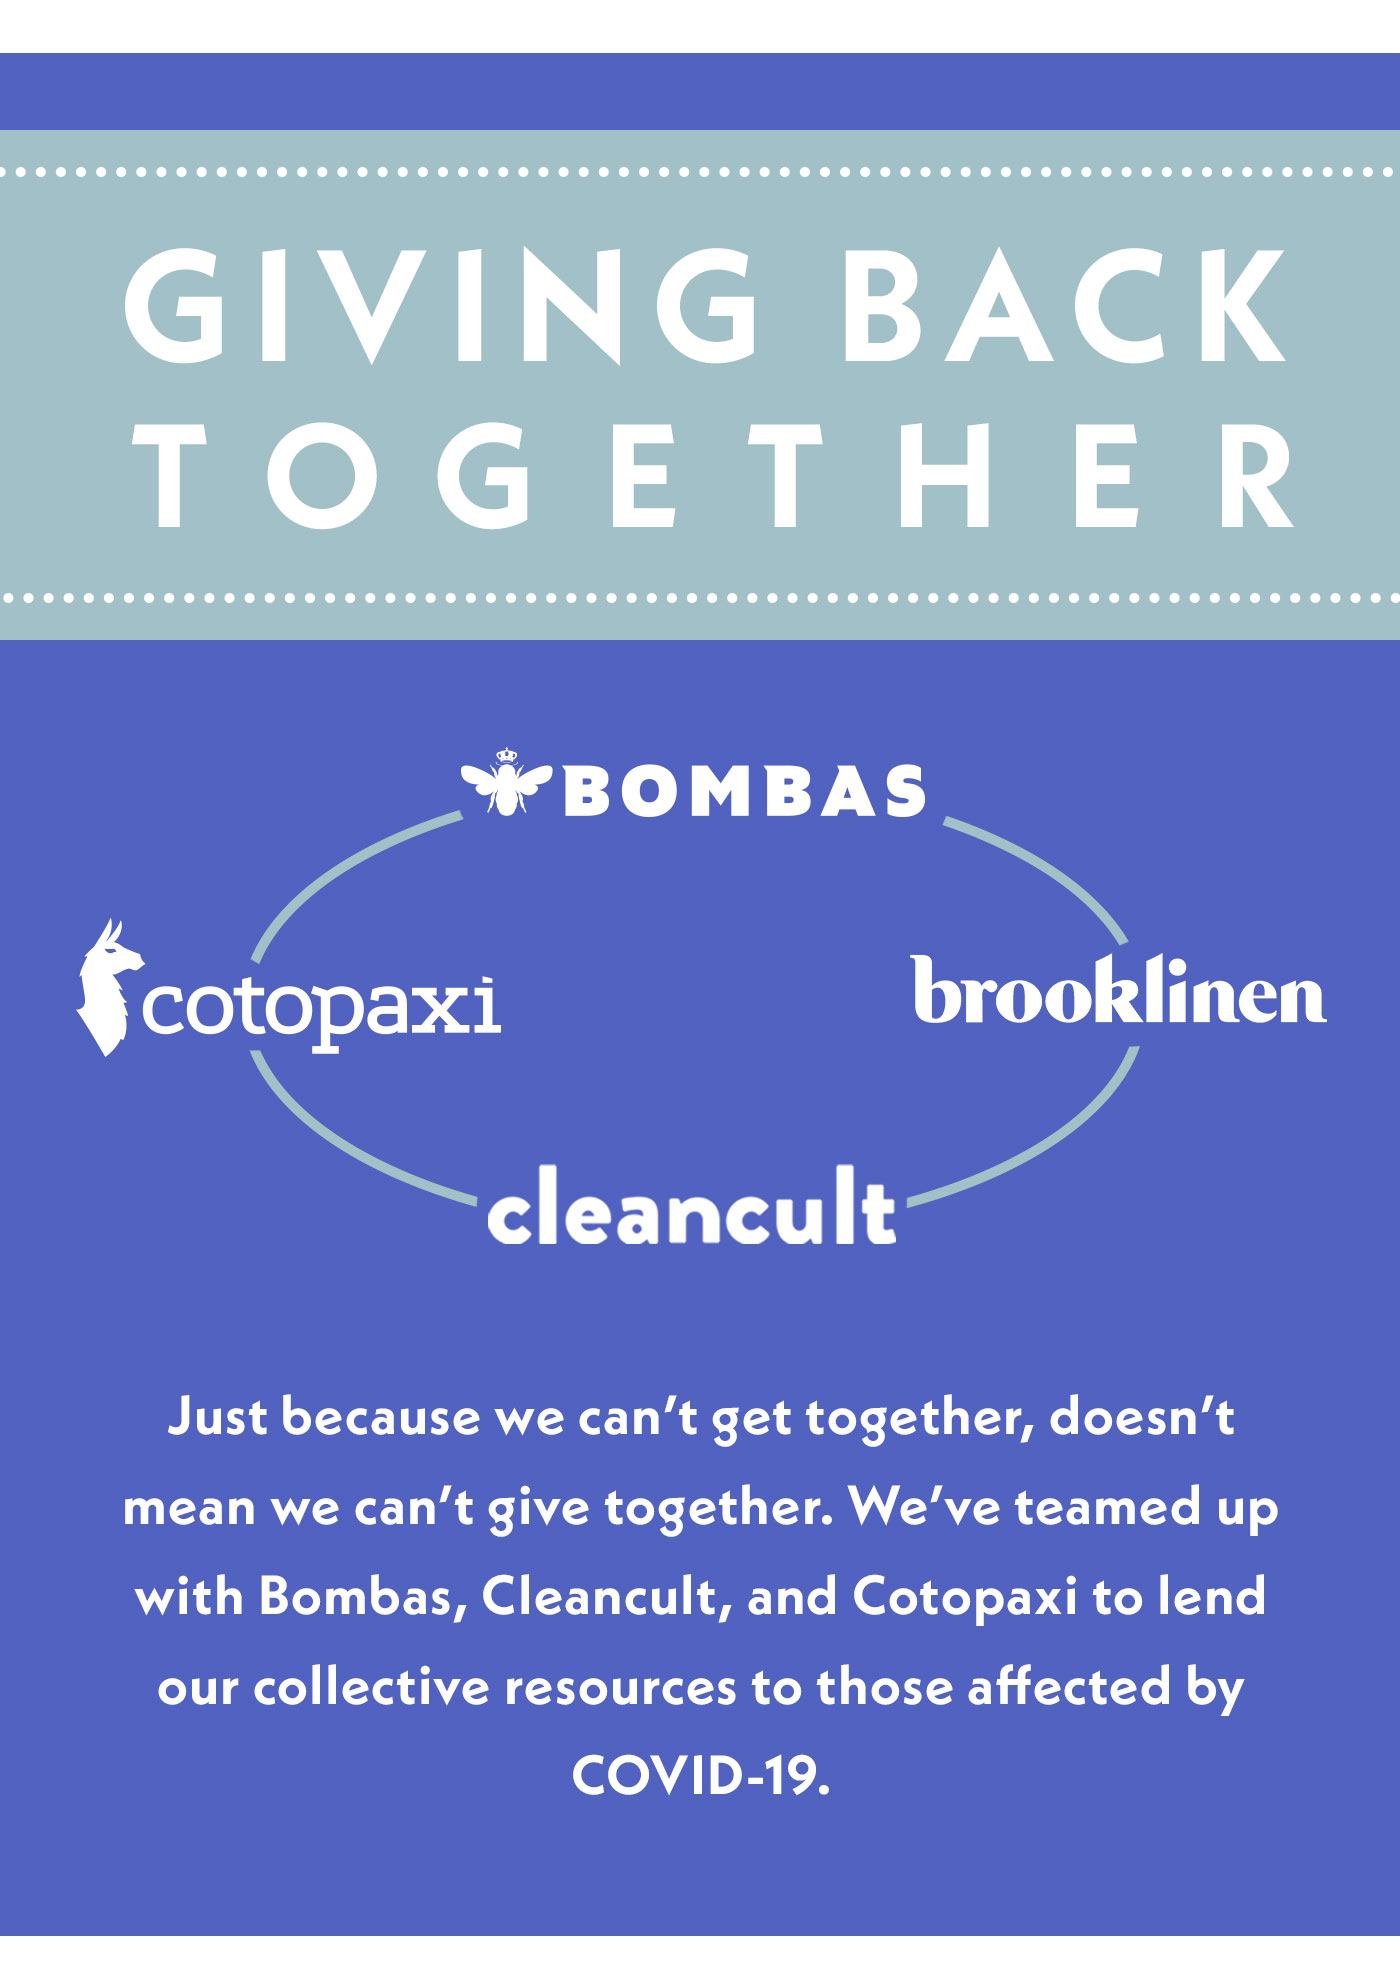 We are giving back together.